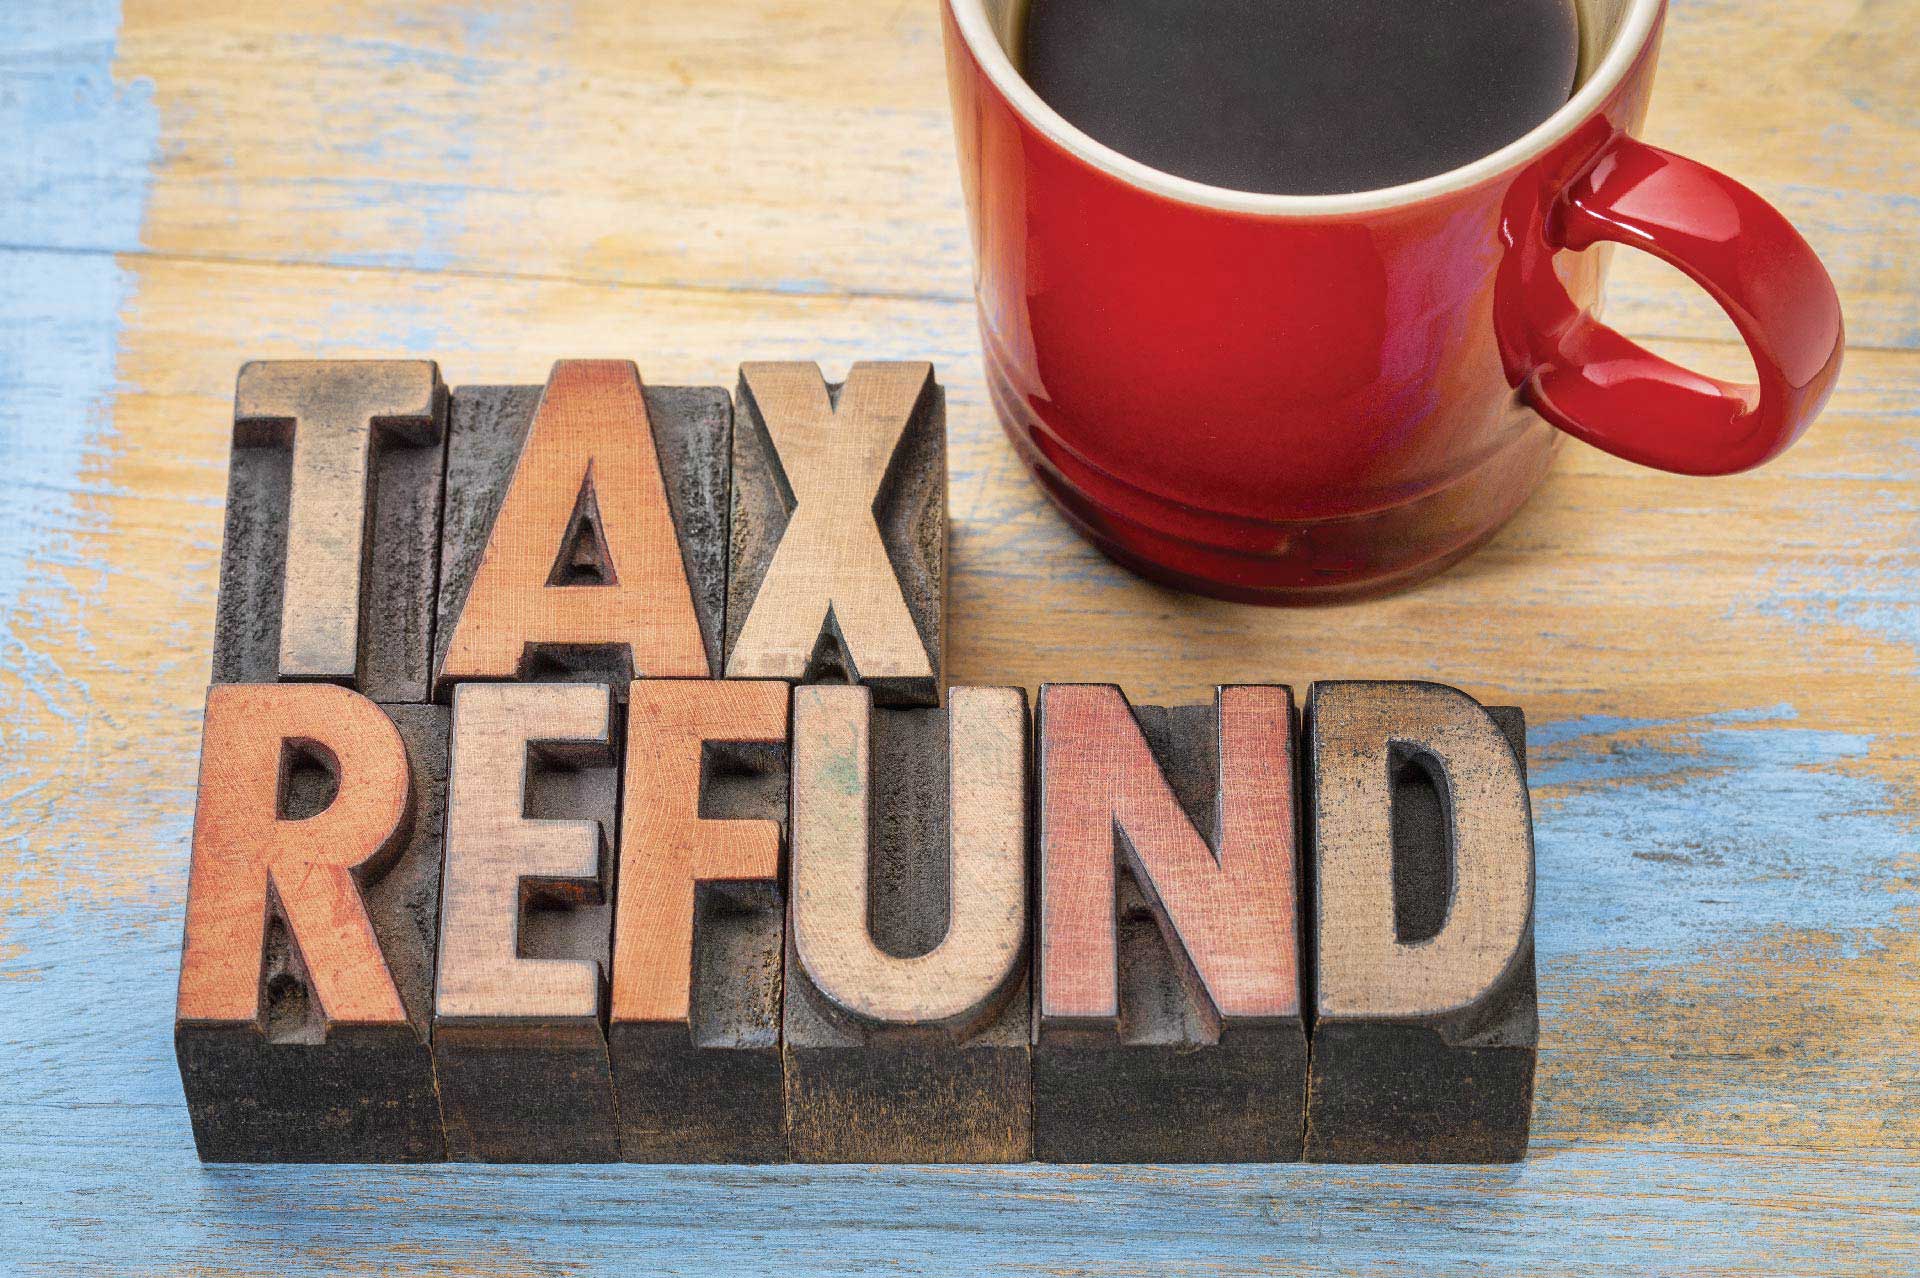 Save it, Invest it or Spend it? Best Bets for Your Tax Refund